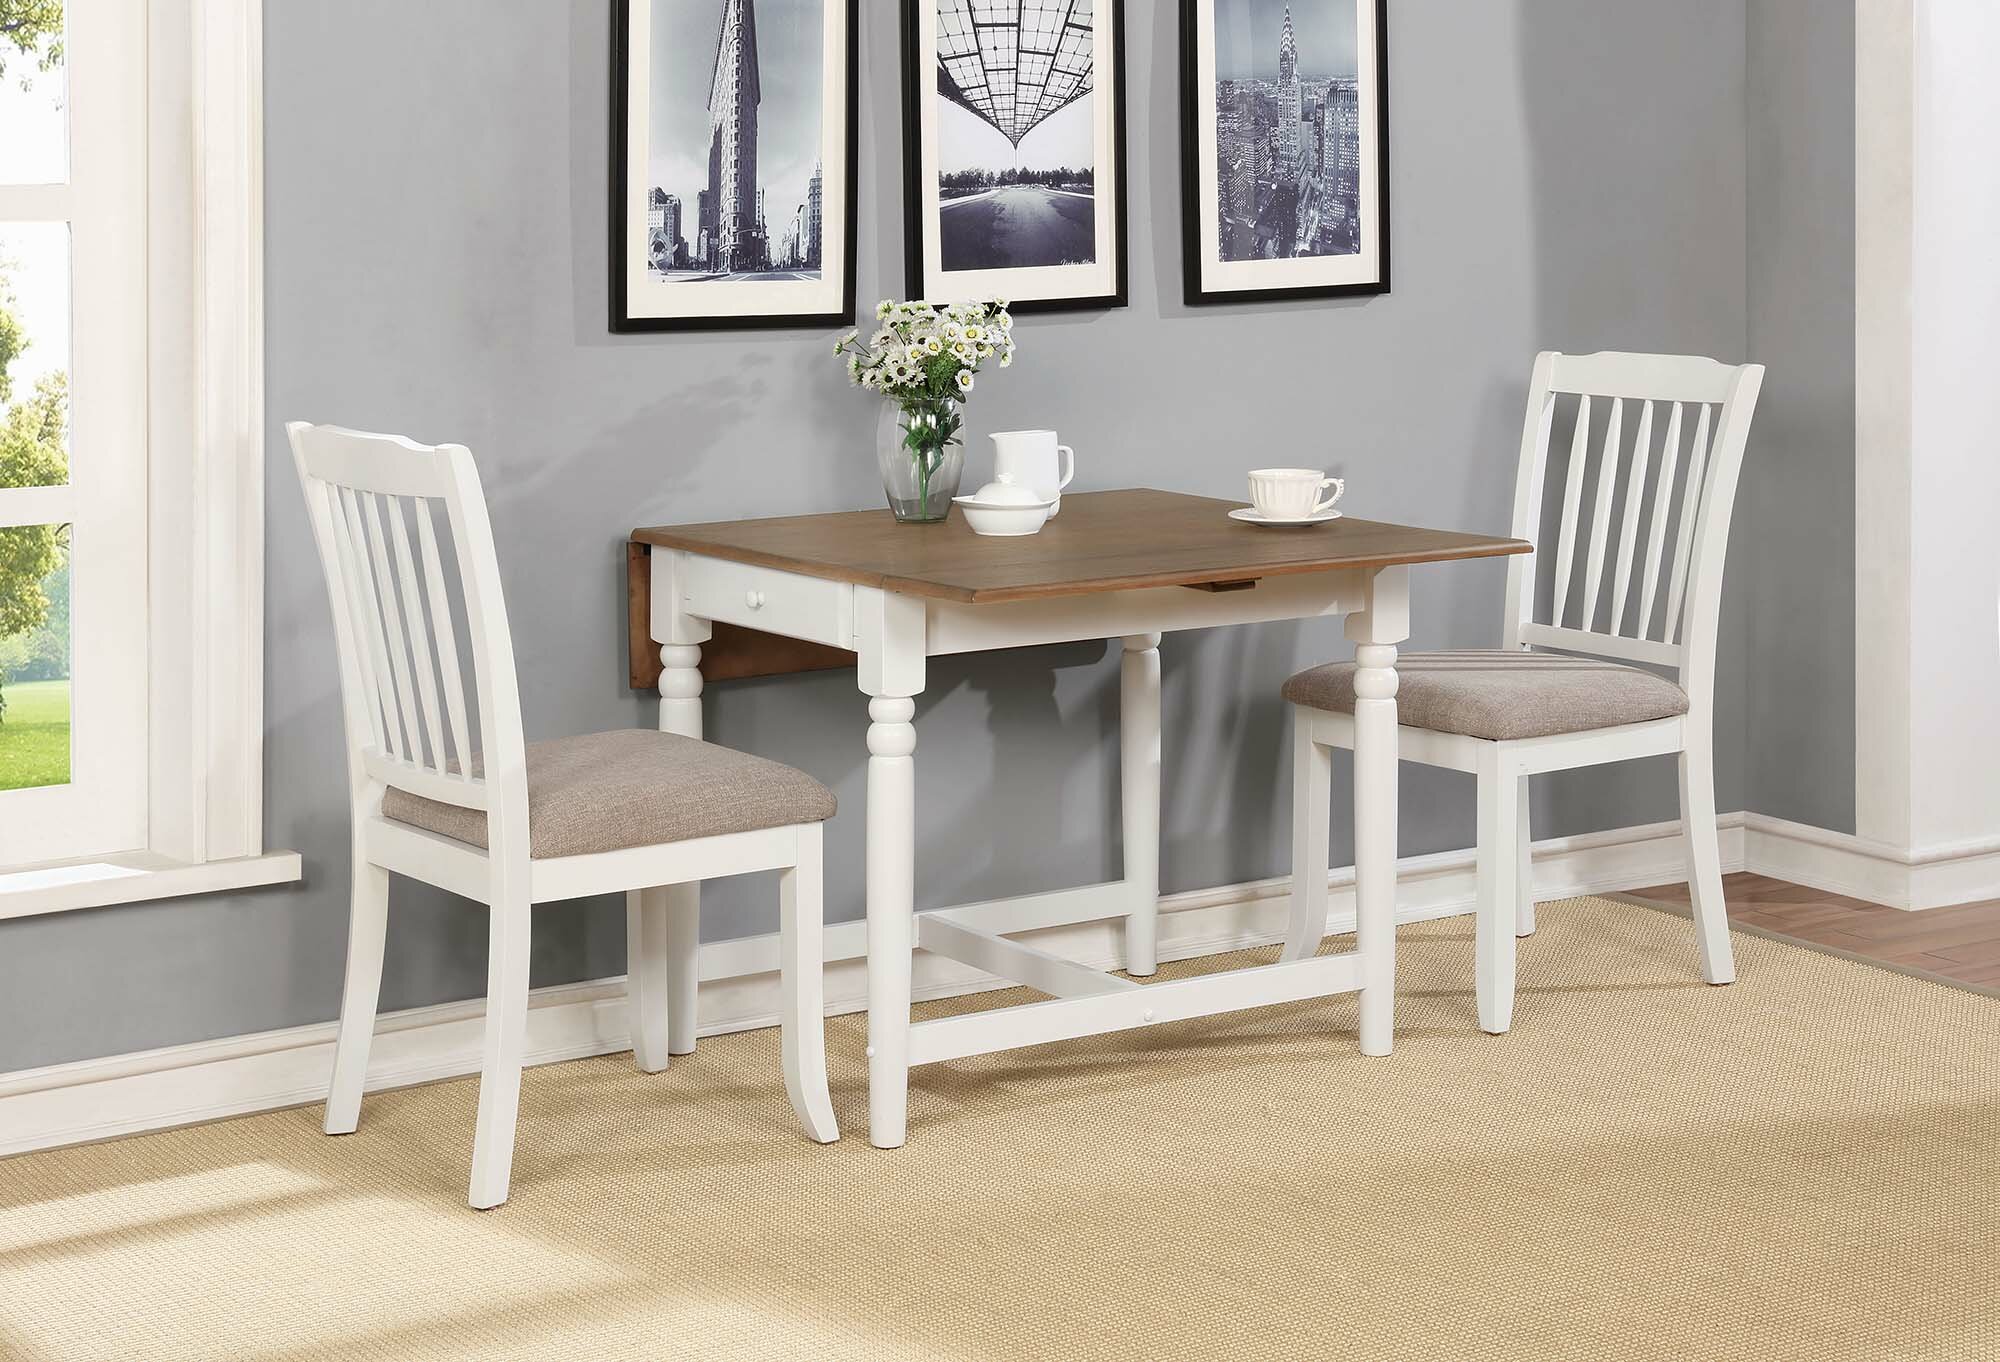 Dinette Table With Leaf